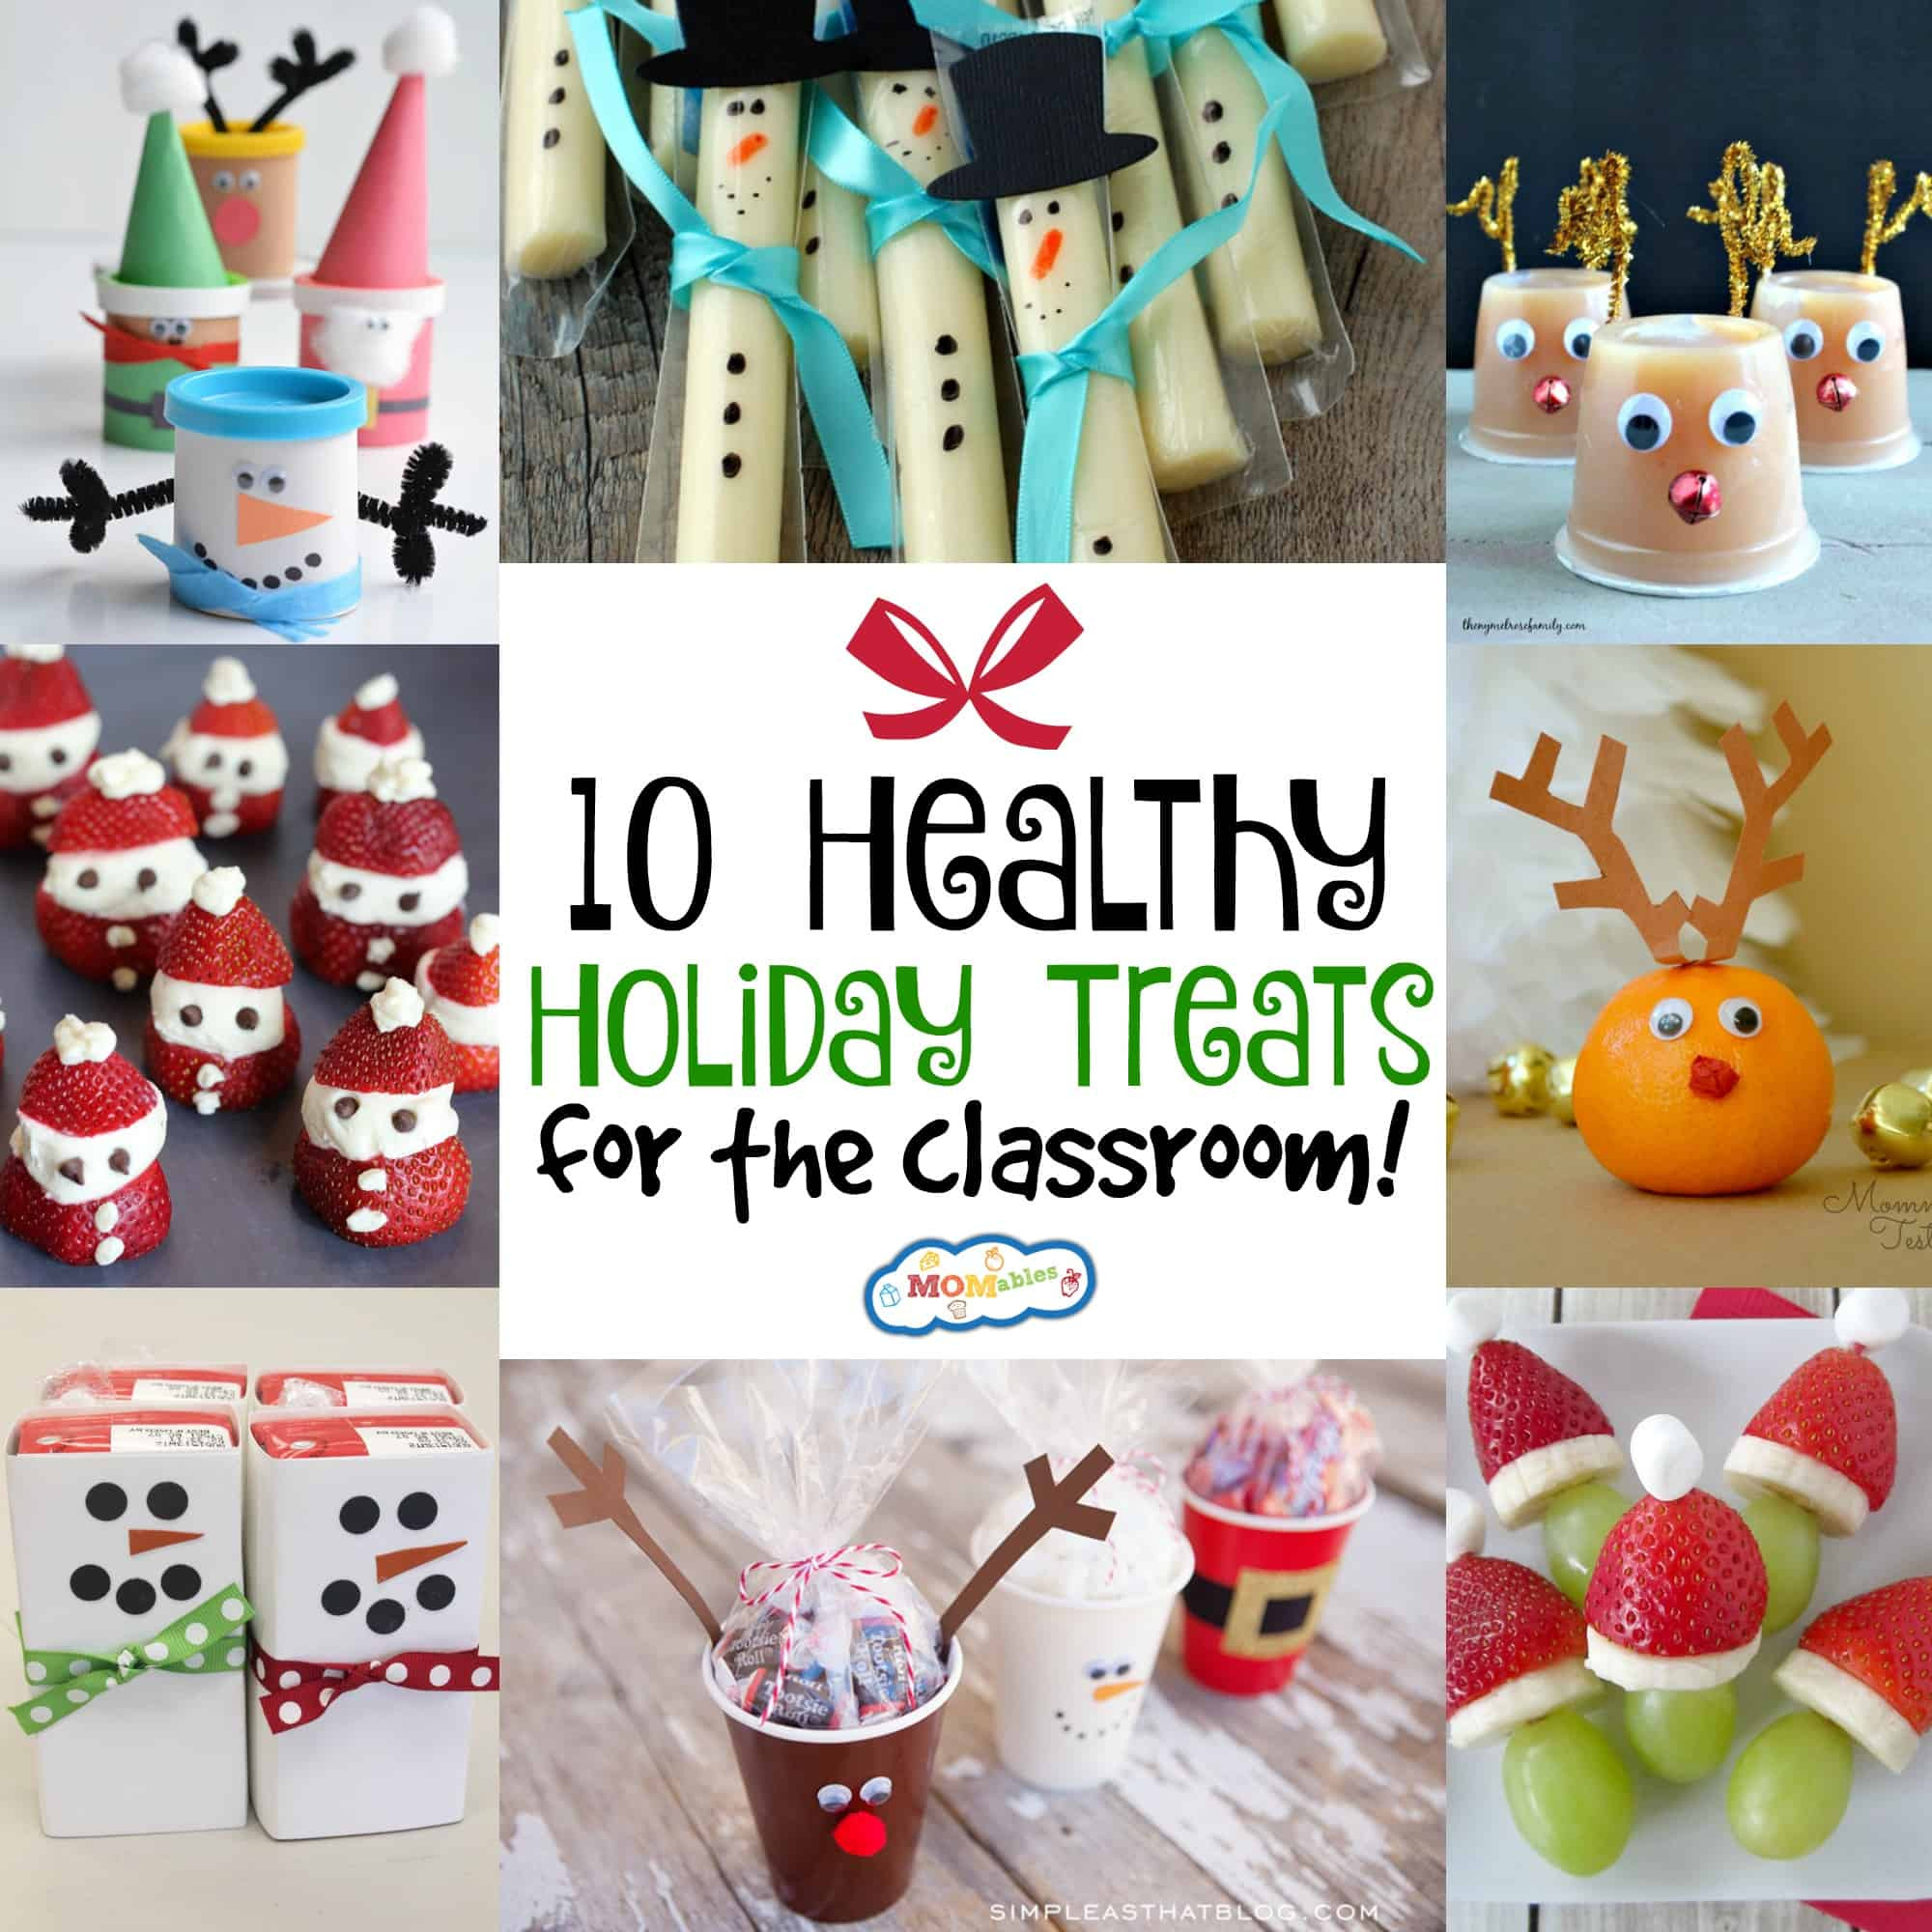 School Holiday Party Food Ideas
 10 Healthy Holiday Treats for the Classroom MOMables